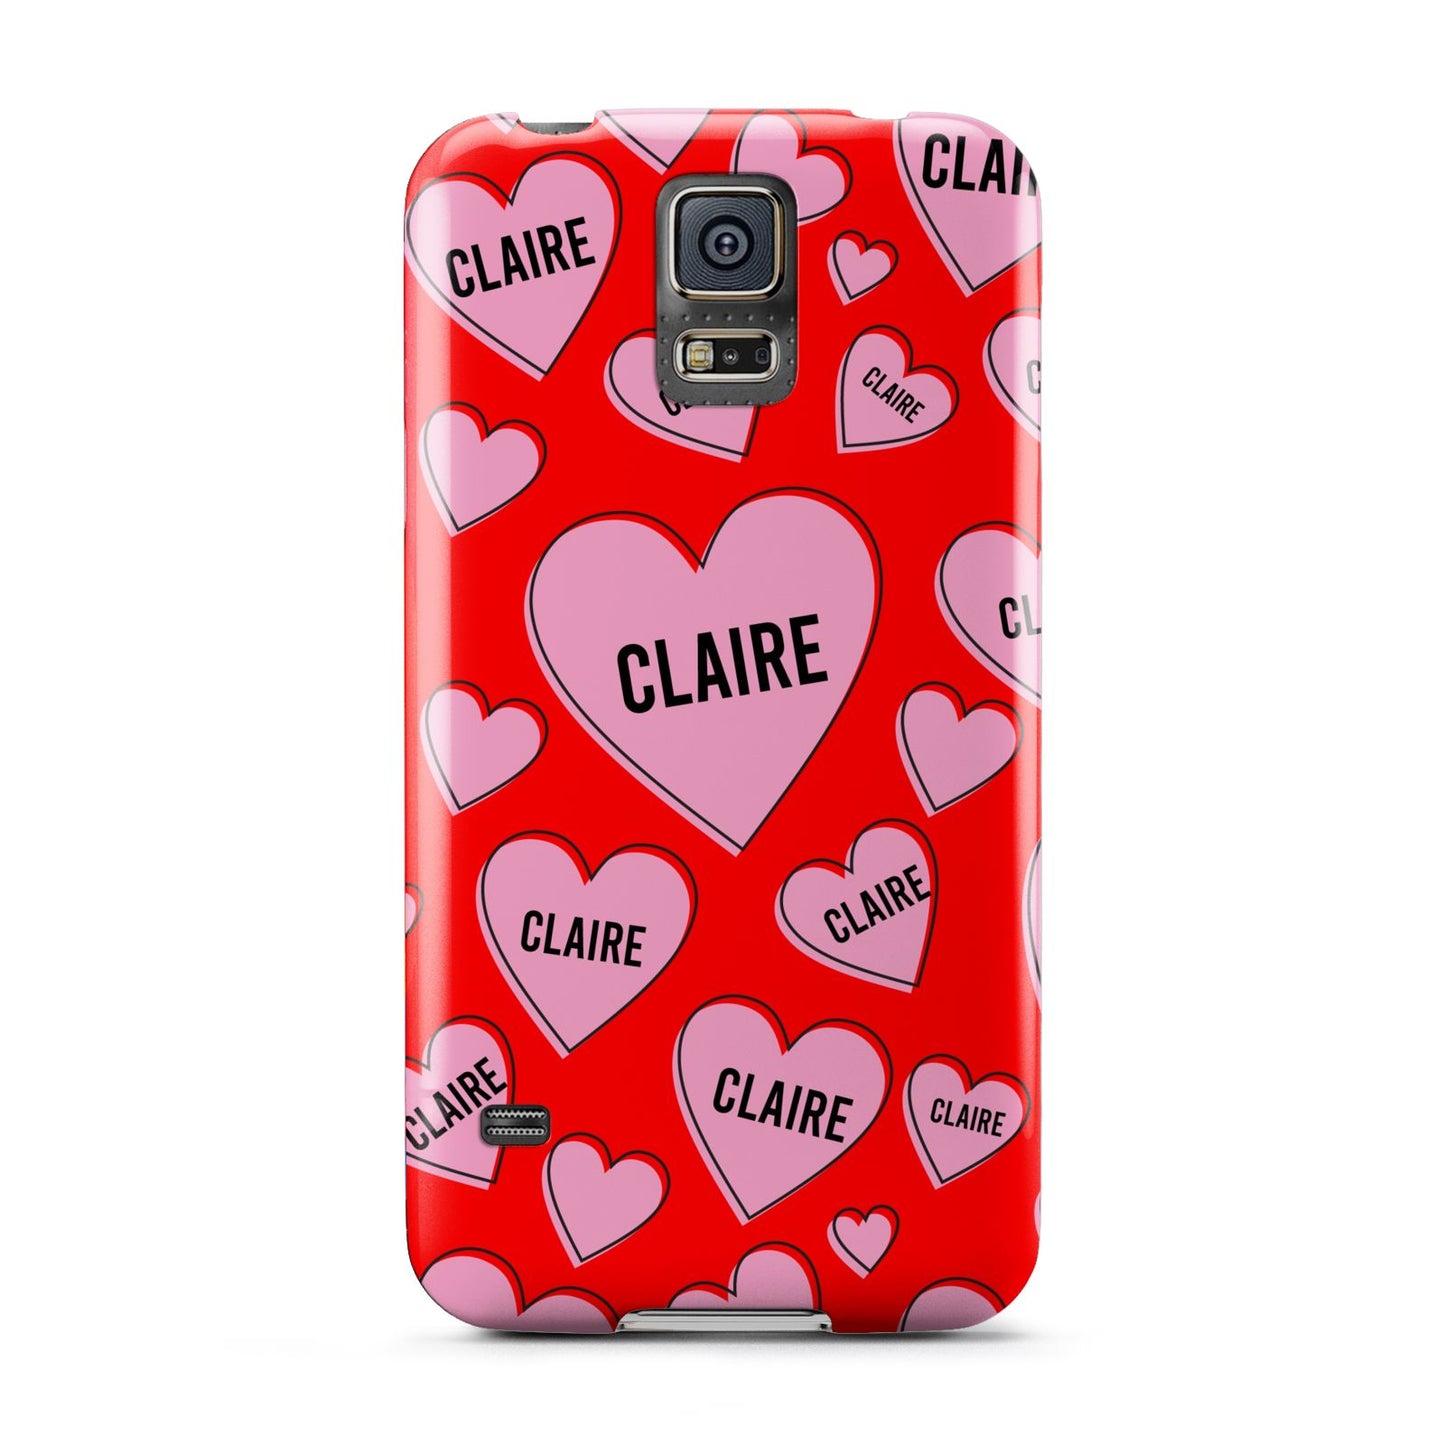 Personalised Hearts Samsung Galaxy S5 Case